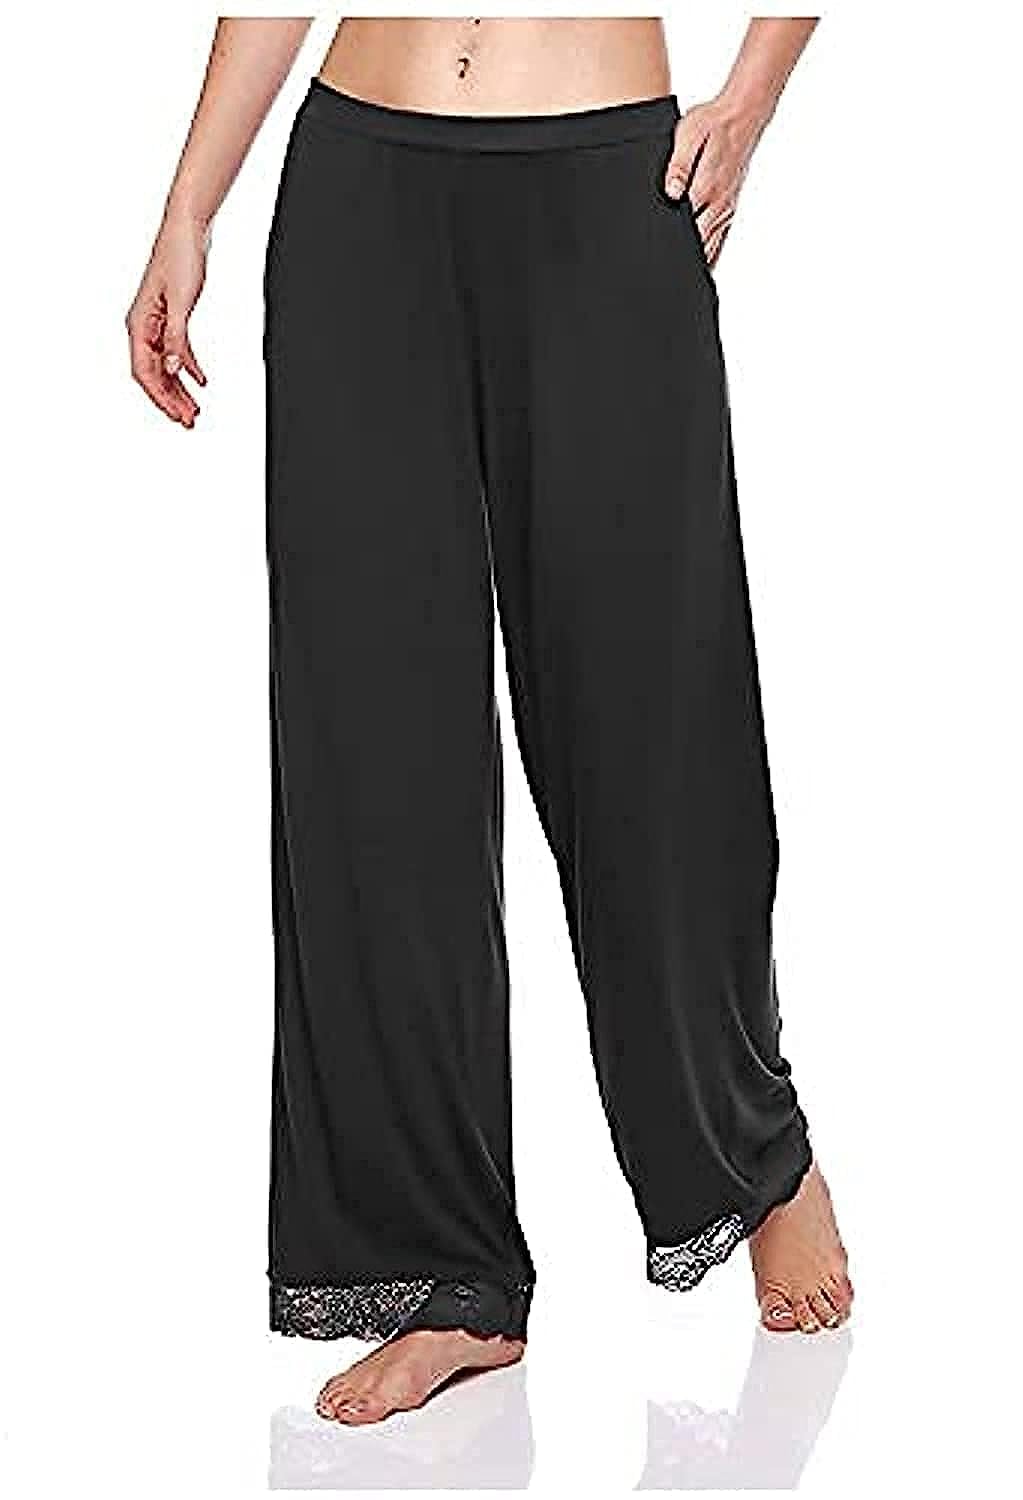 Wide fit pants - black color - one size for women Color Black Size One Size